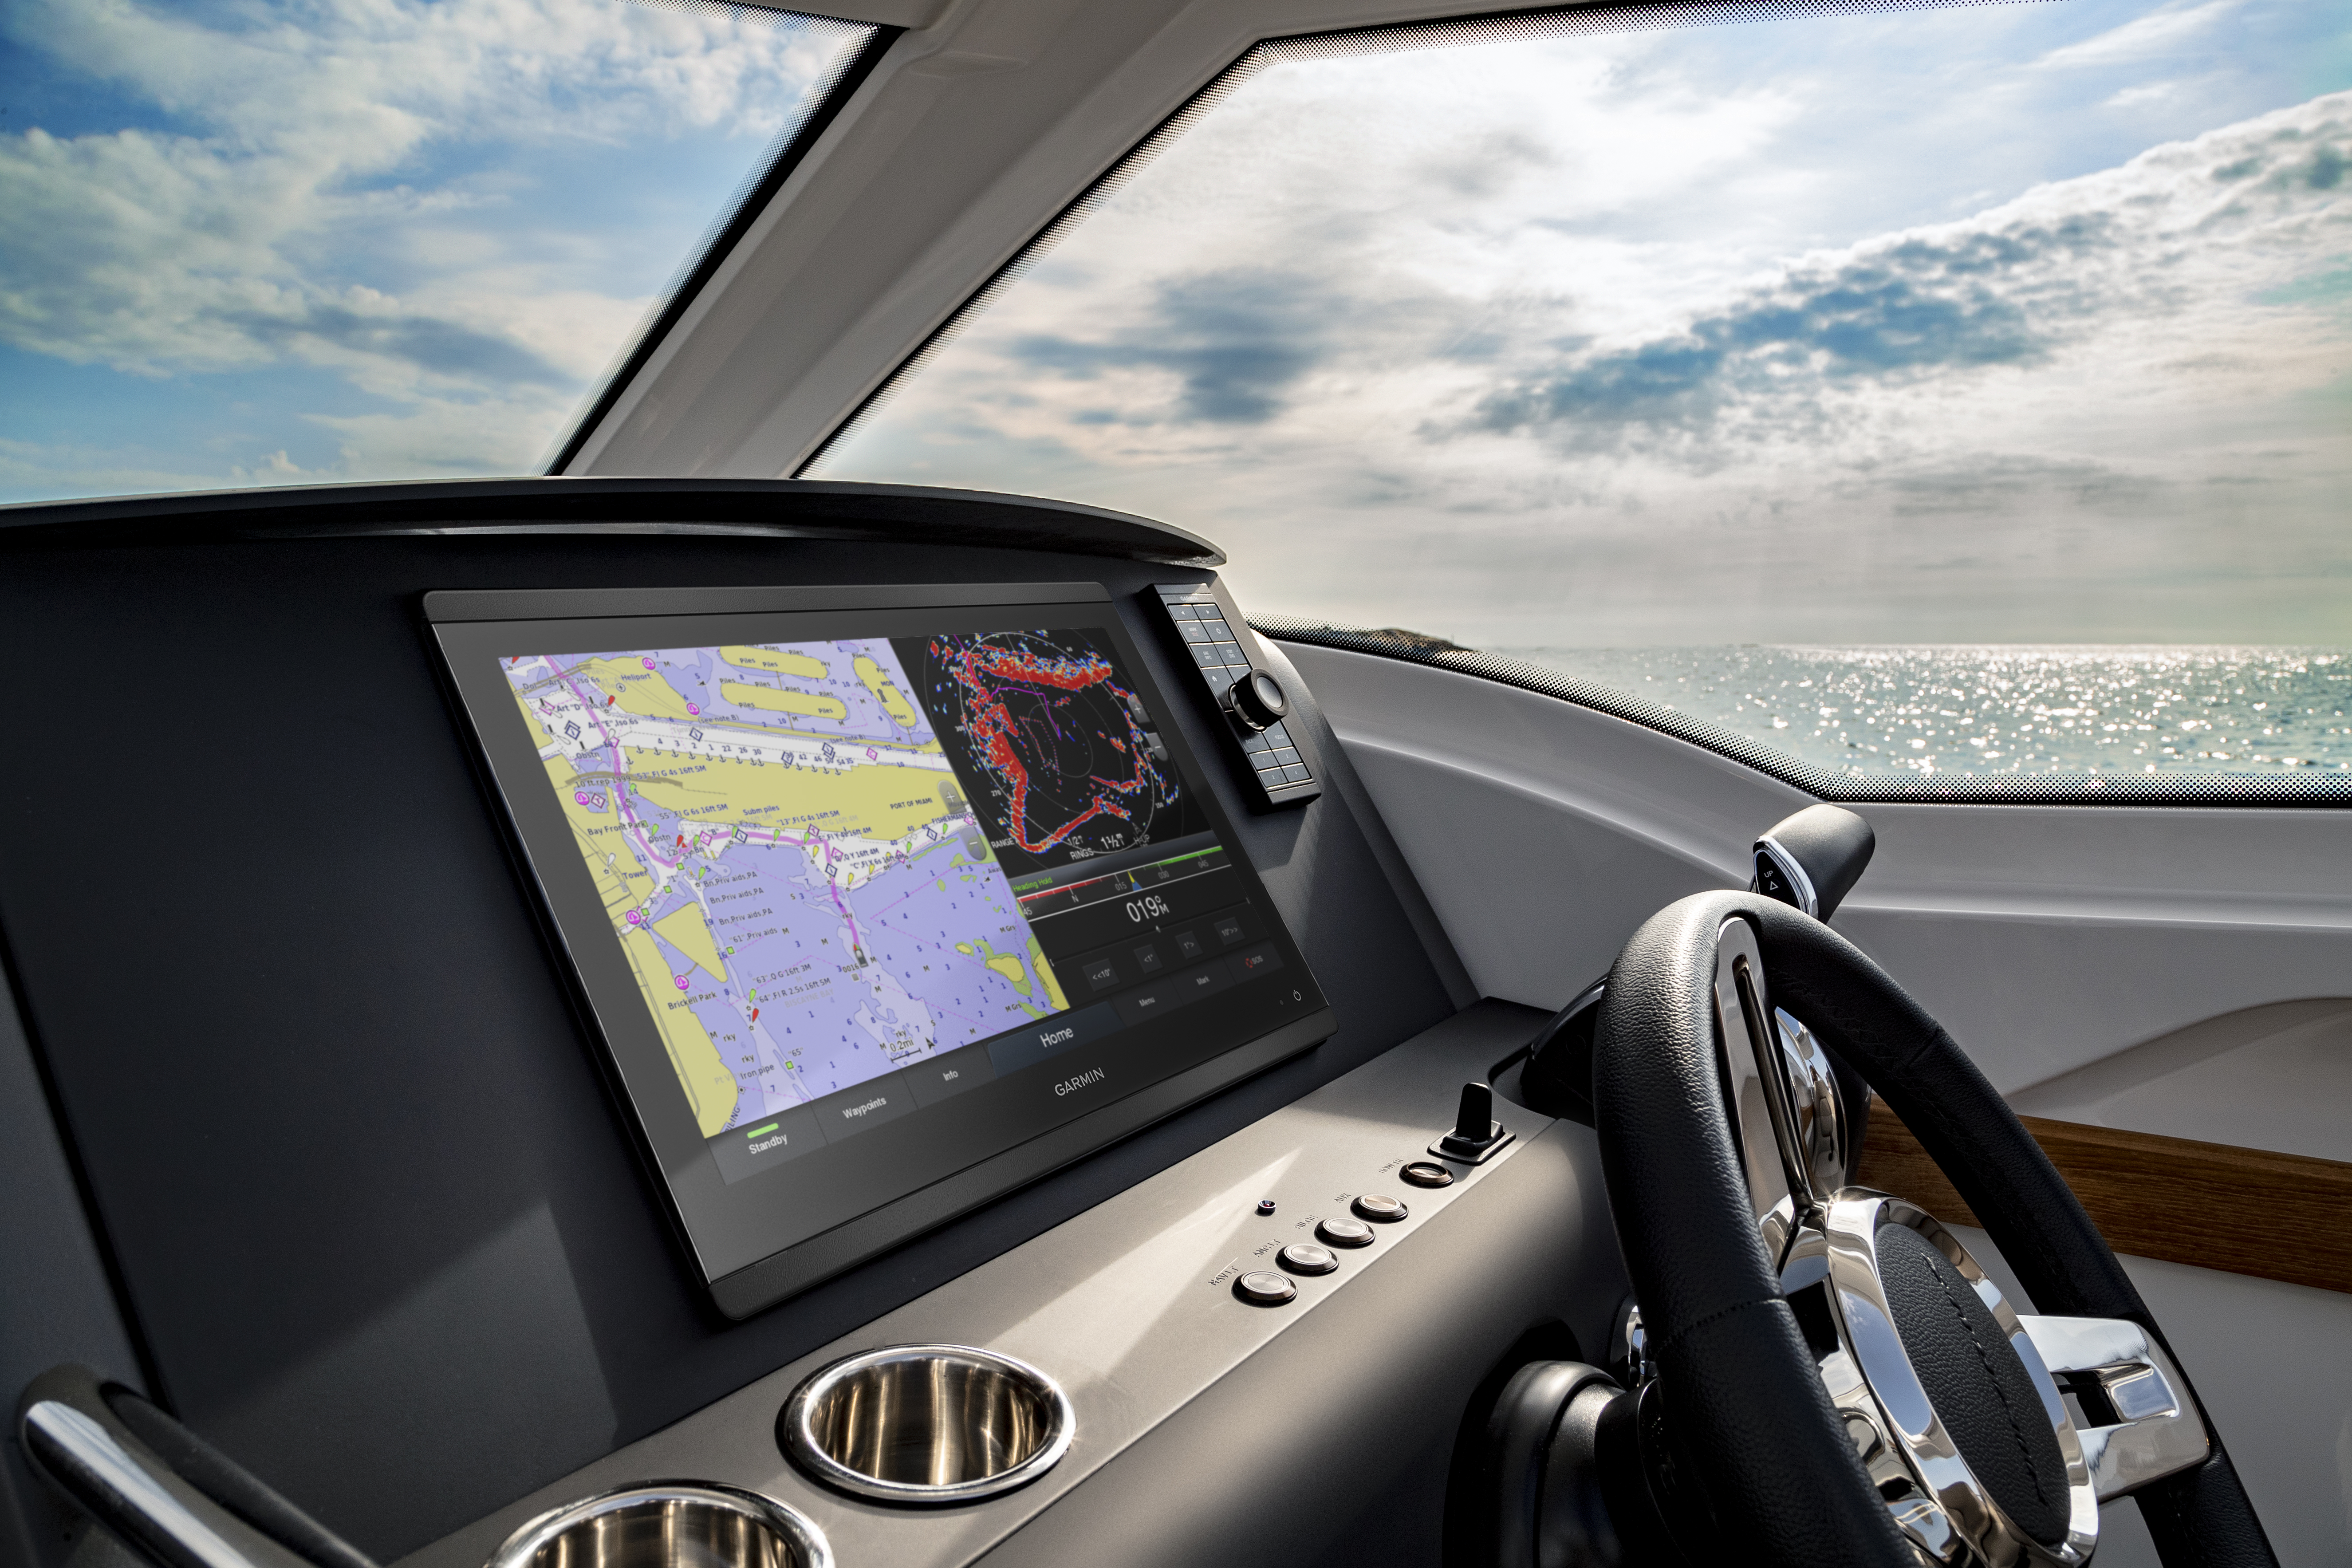 Garmin introduces slate of marine products, Industry